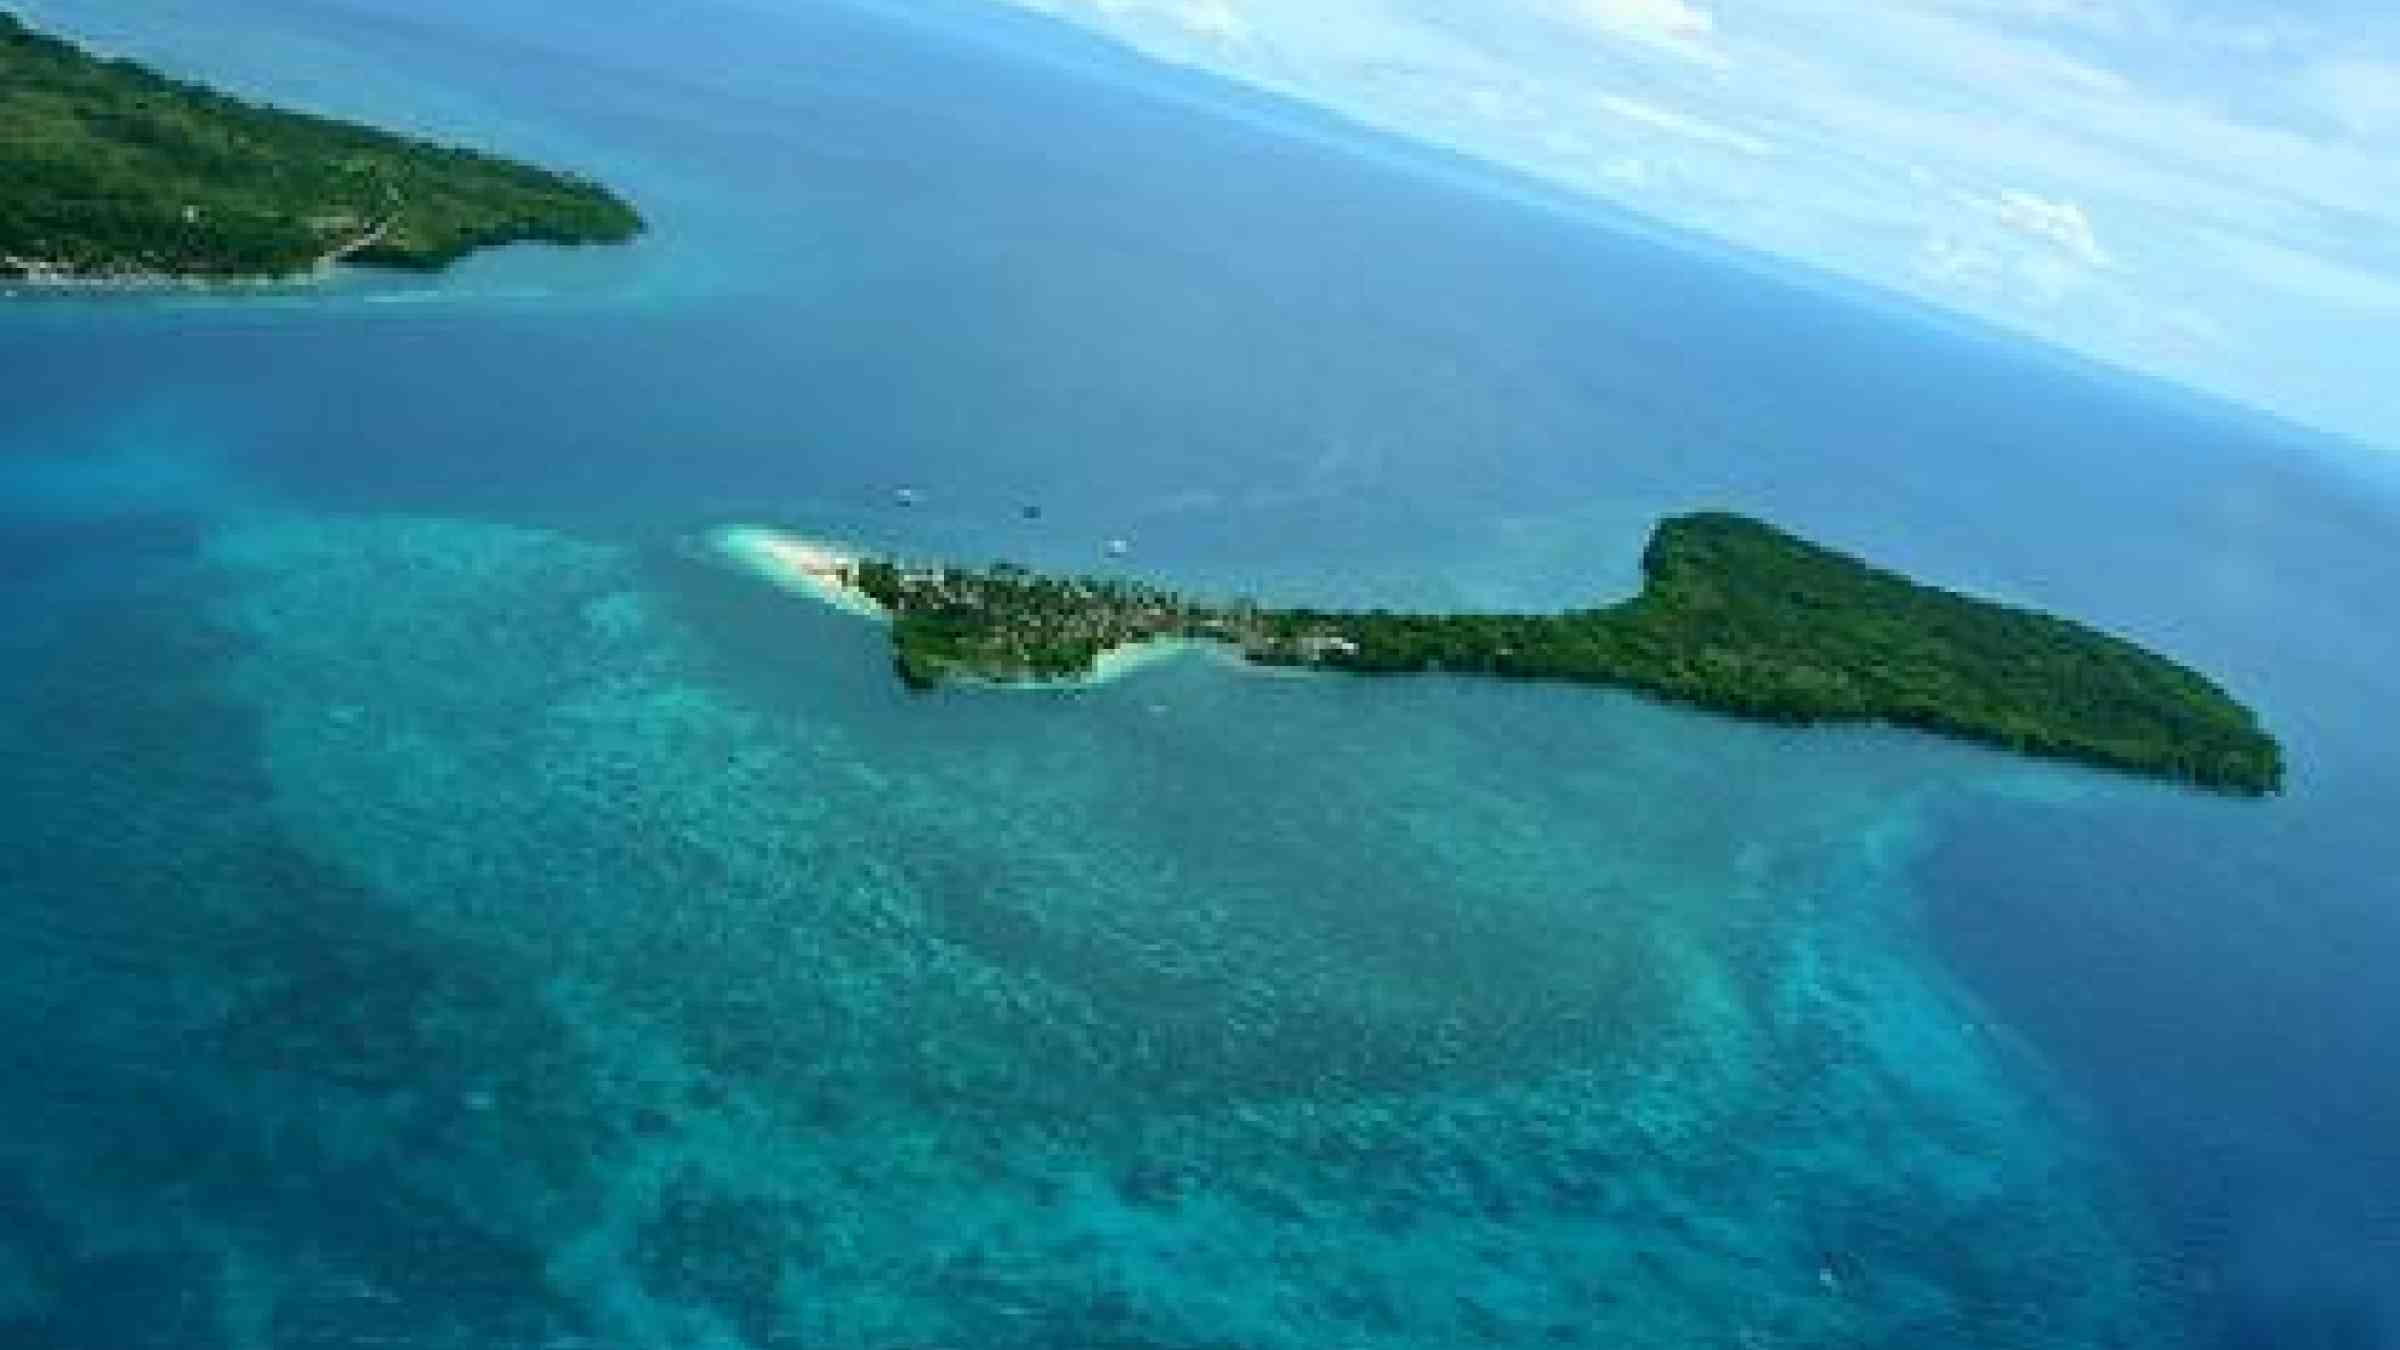 The tiny island of Tulang Diyot, which lies just off the island of San Francisco.